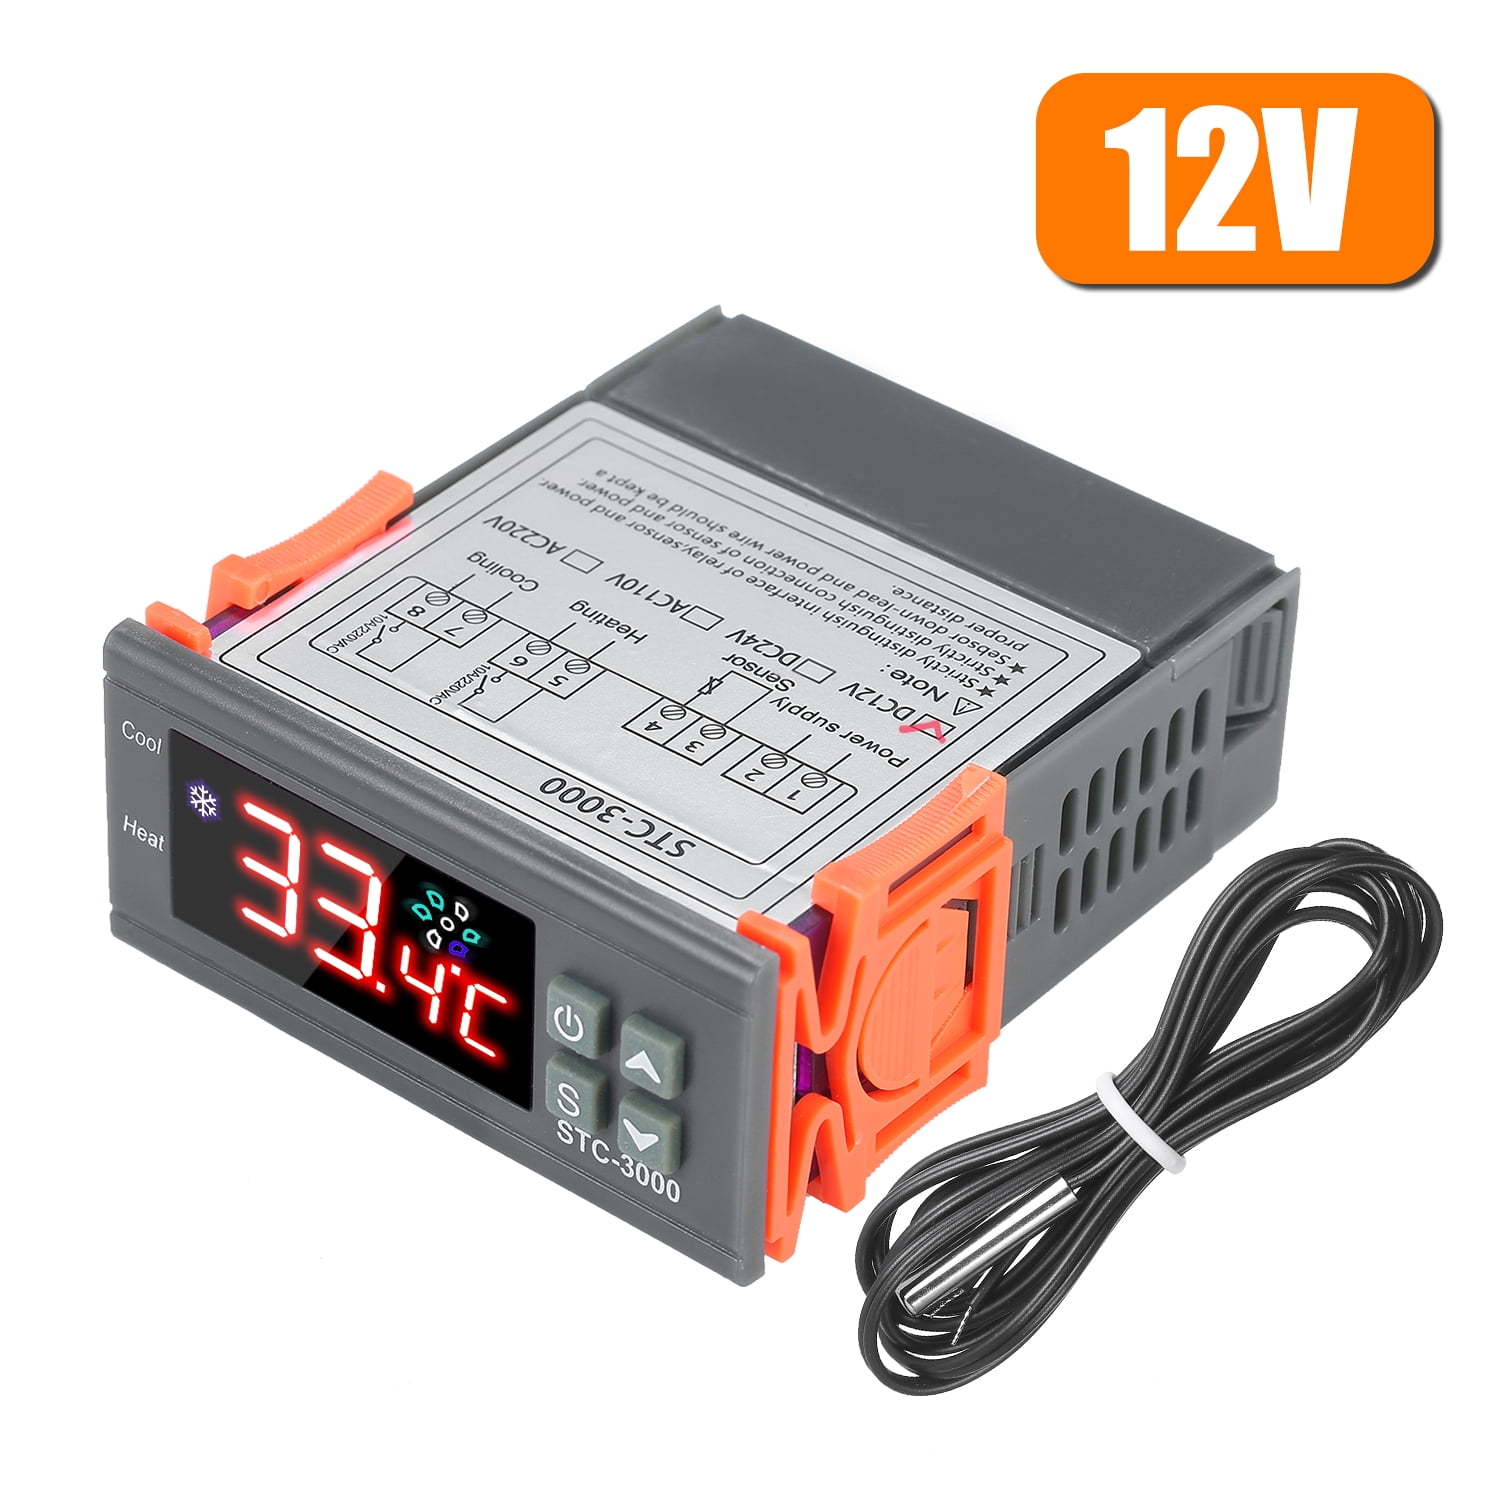 12V Cool Heat Digital Temperature Controller Thermostat Microcomputer Timer 